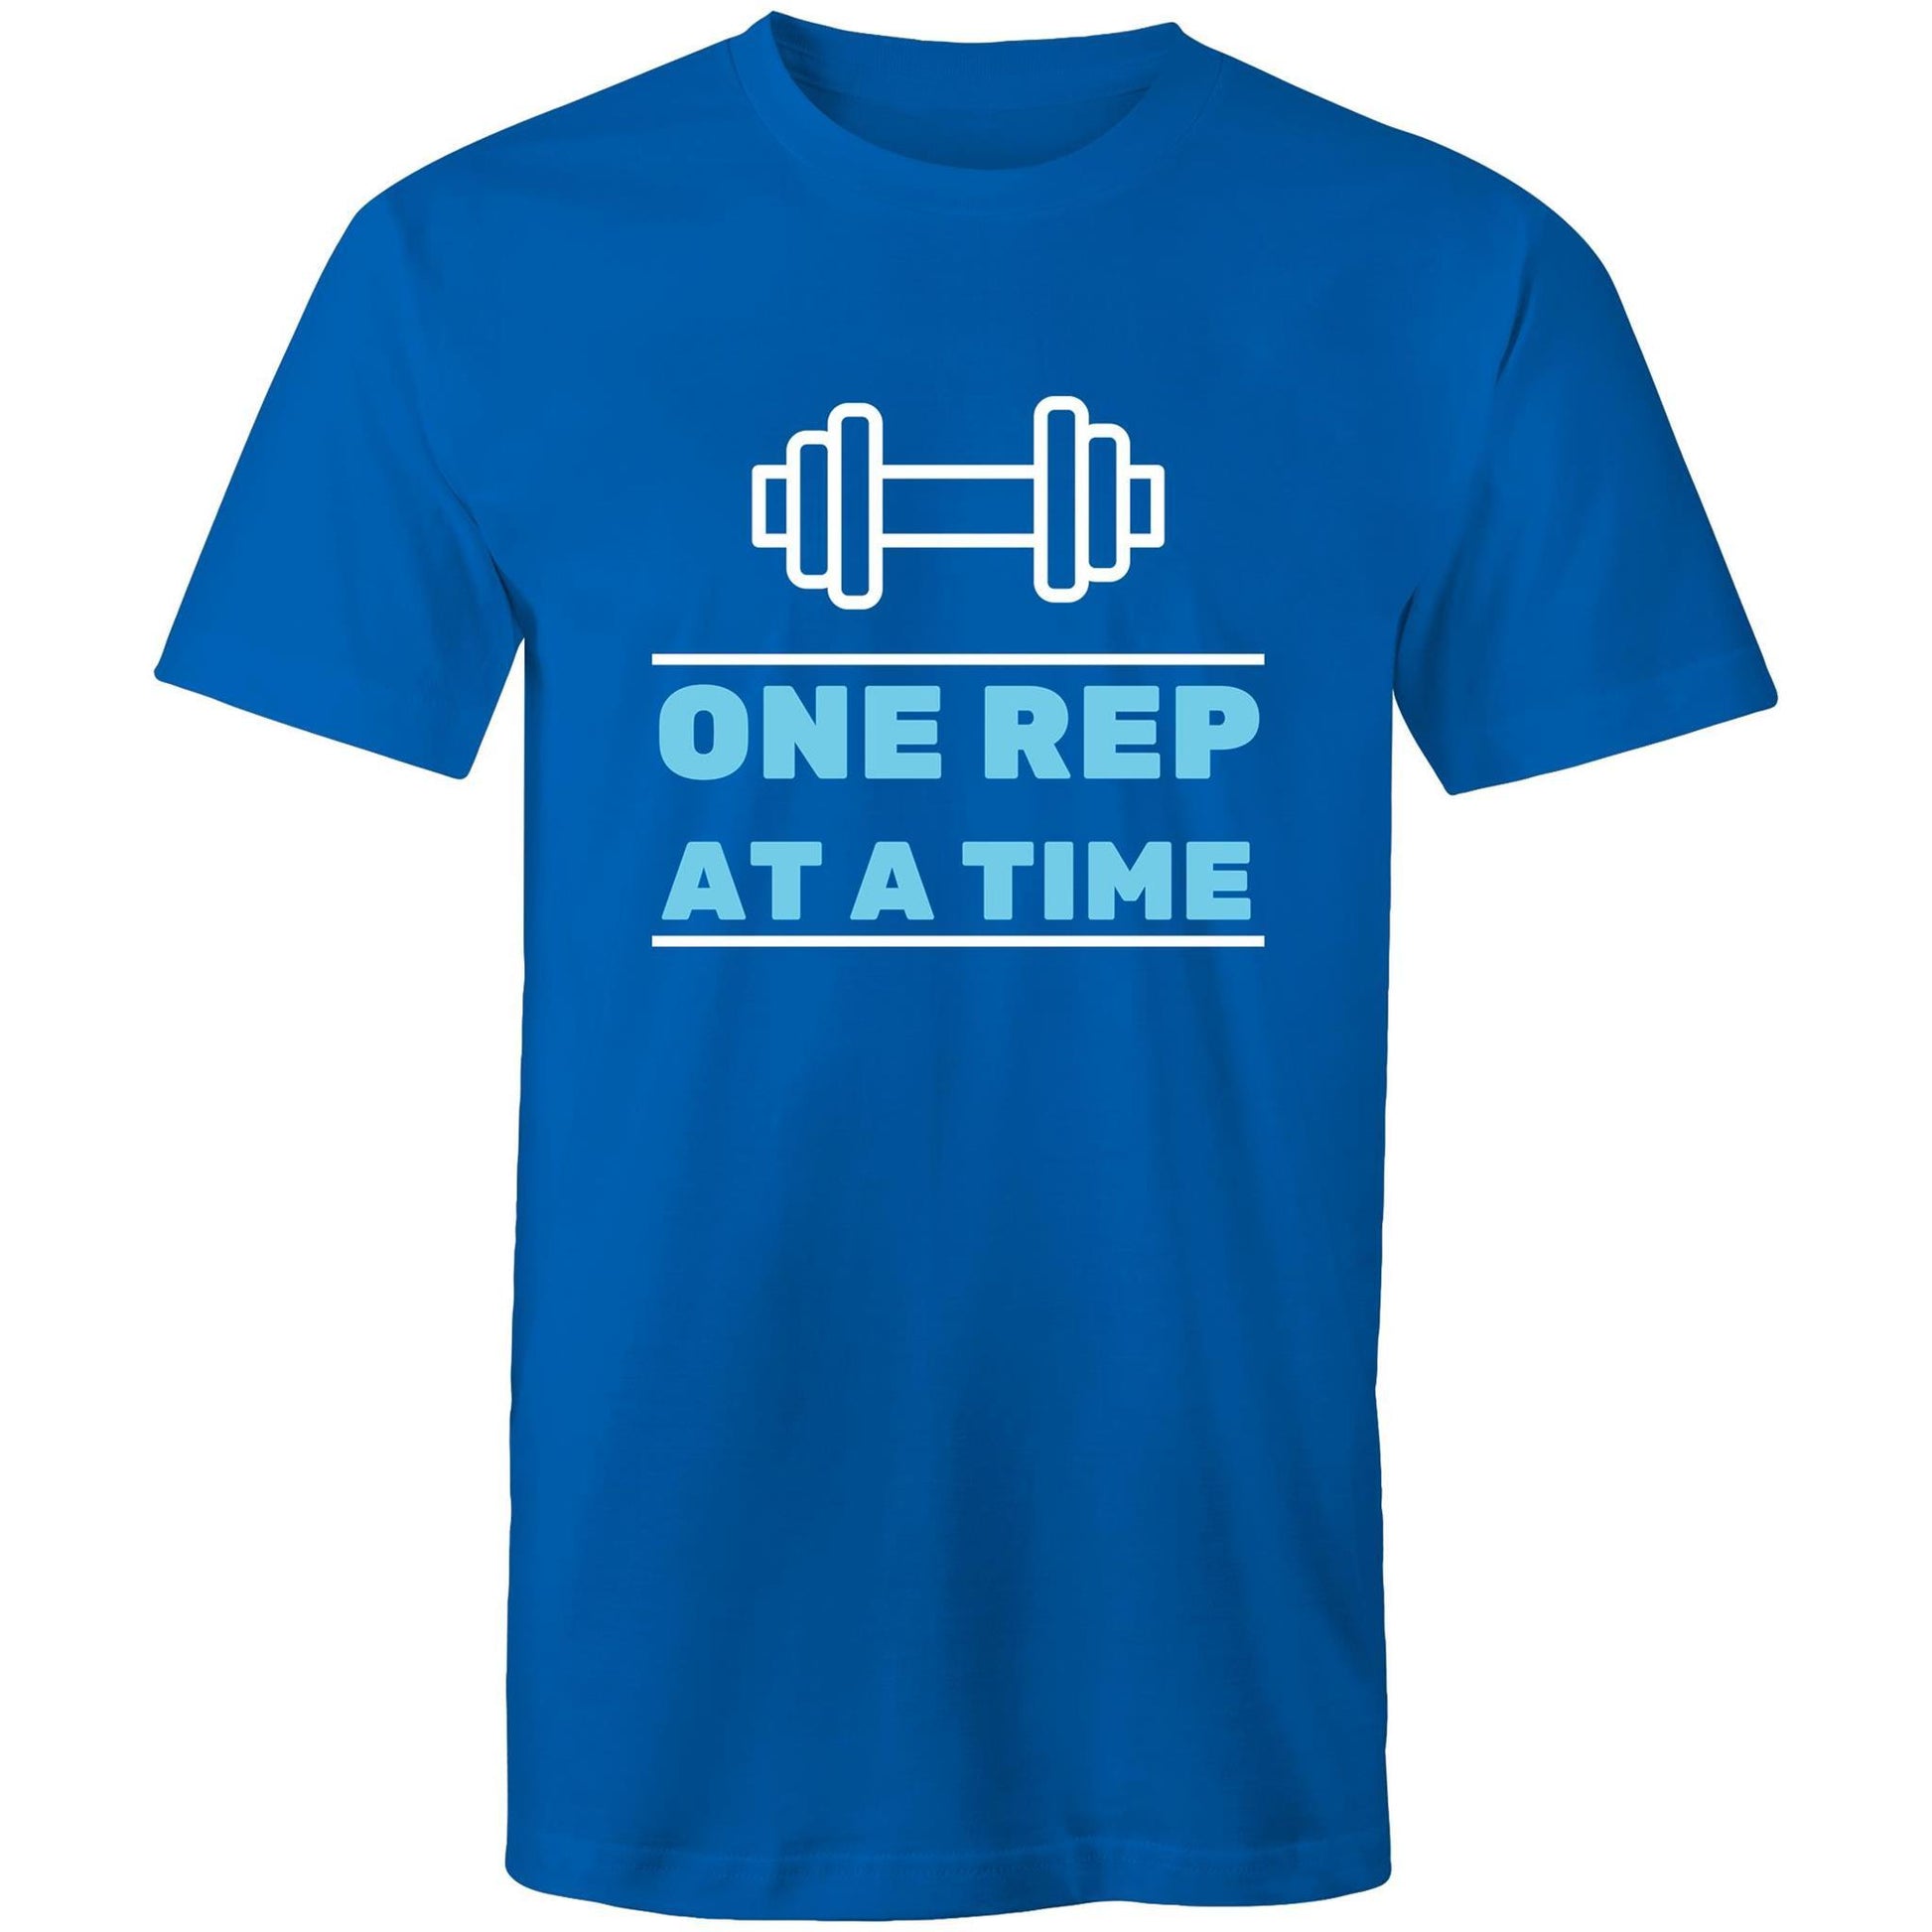 One Rep At A Time - Short Sleeve T-shirt Bright Royal Fitness T-shirt Fitness Mens Womens